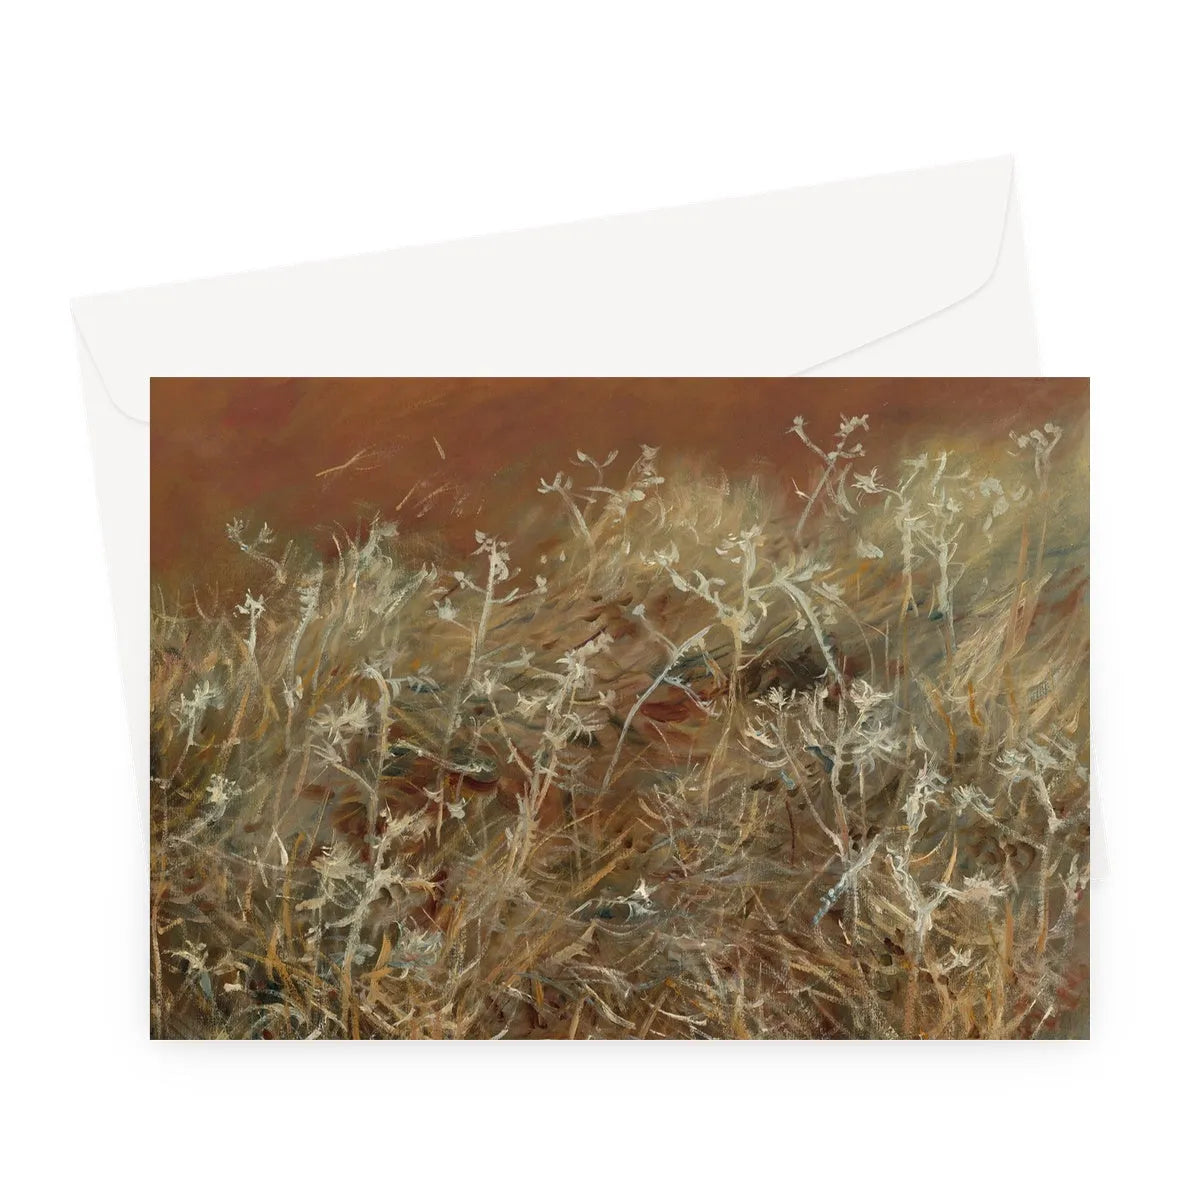 Thistles By John Singer Sargent Greeting Card - A5 Landscape / 1 Card - Notebooks & Notepads - Aesthetic Art